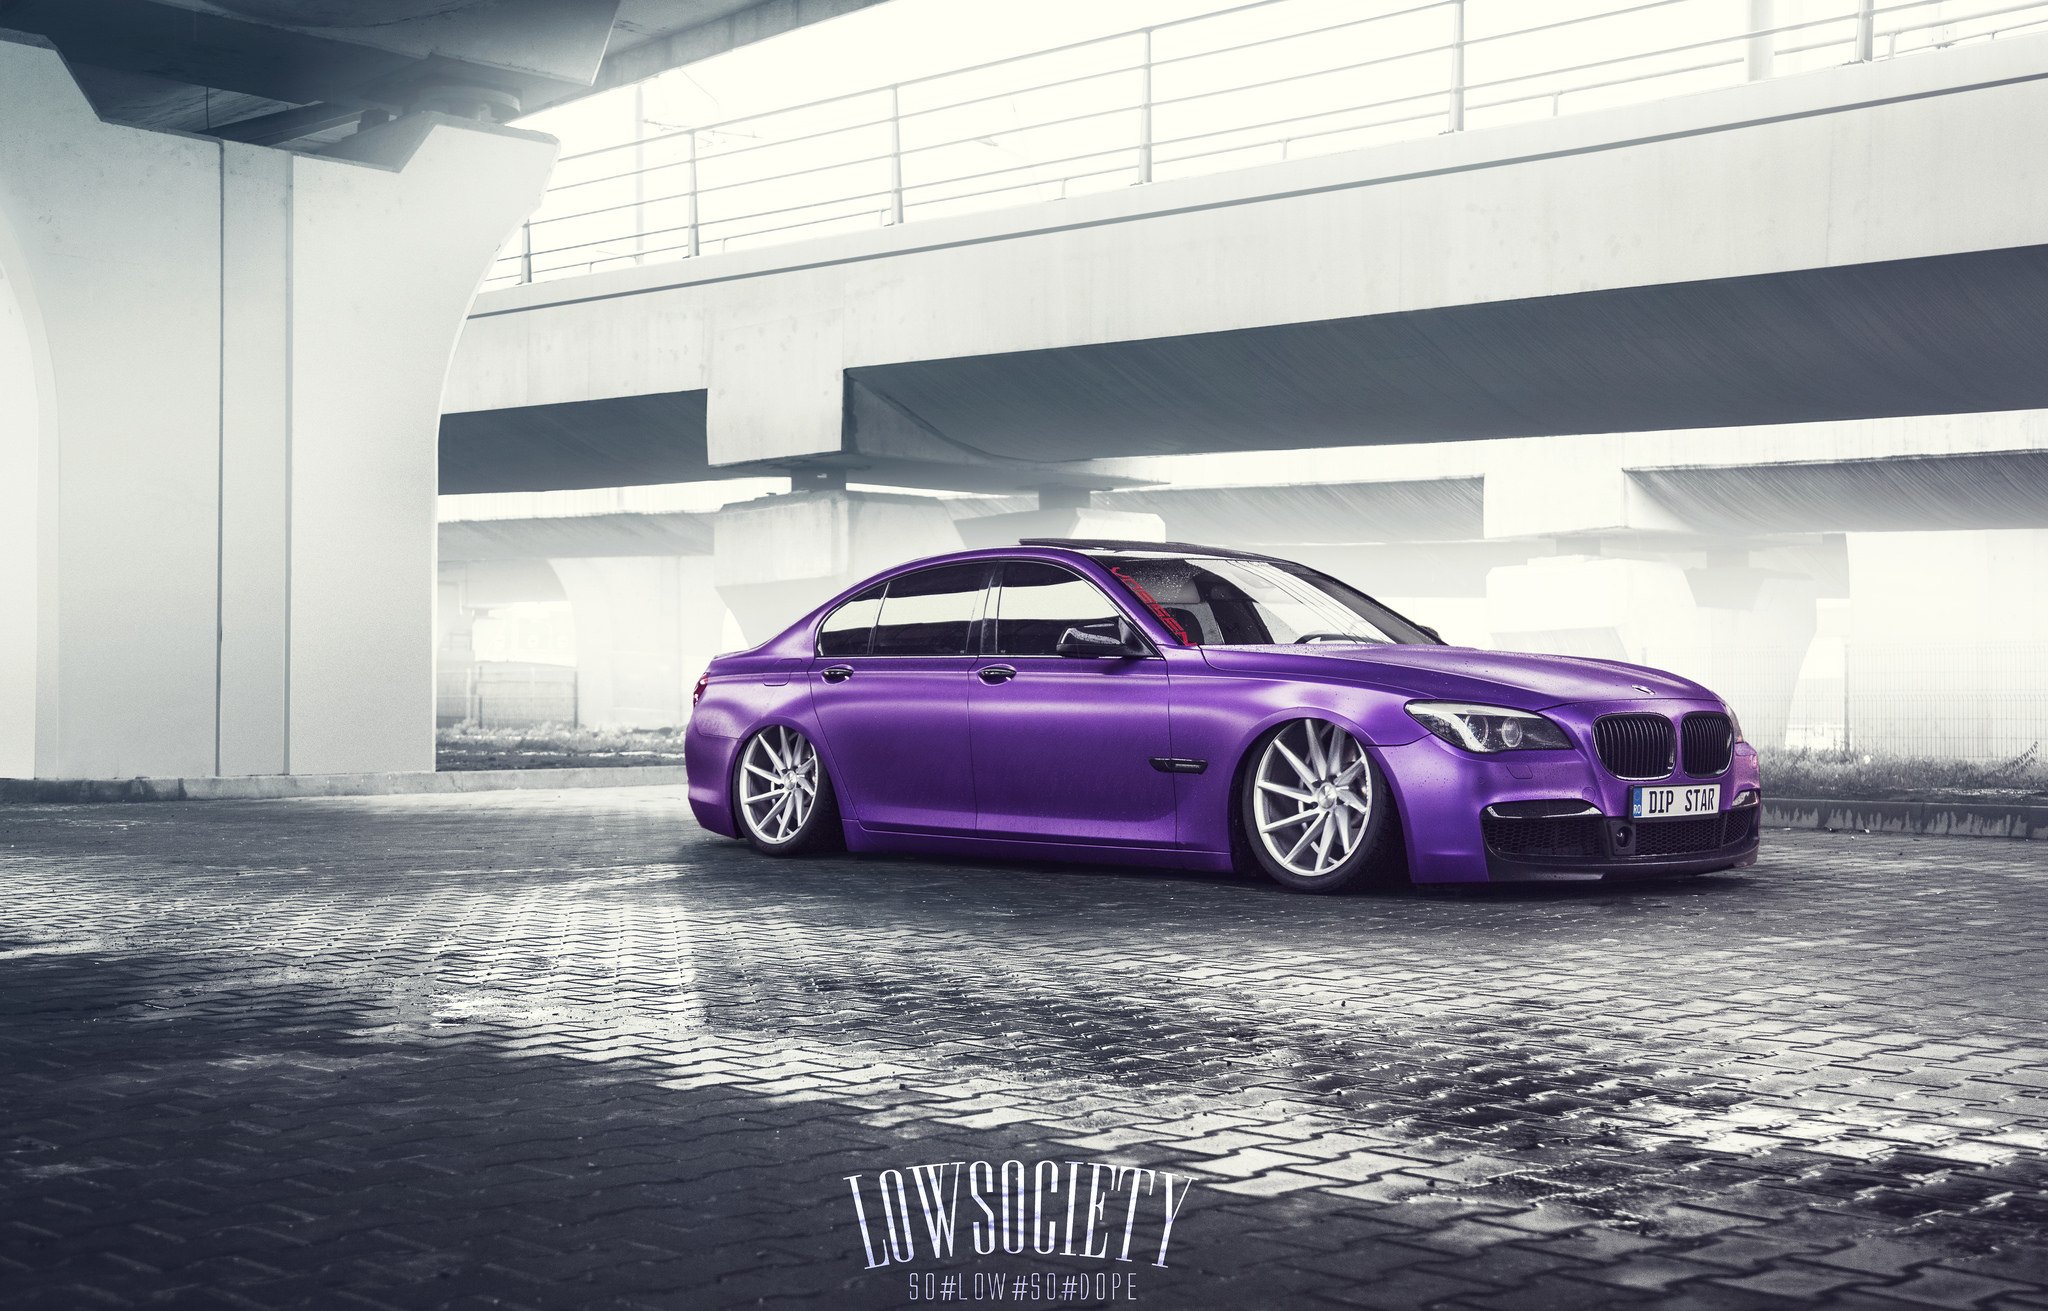 Aftermarket Front Bumper on Purple BMW 7-Series - Photo by Ciprian Mihai